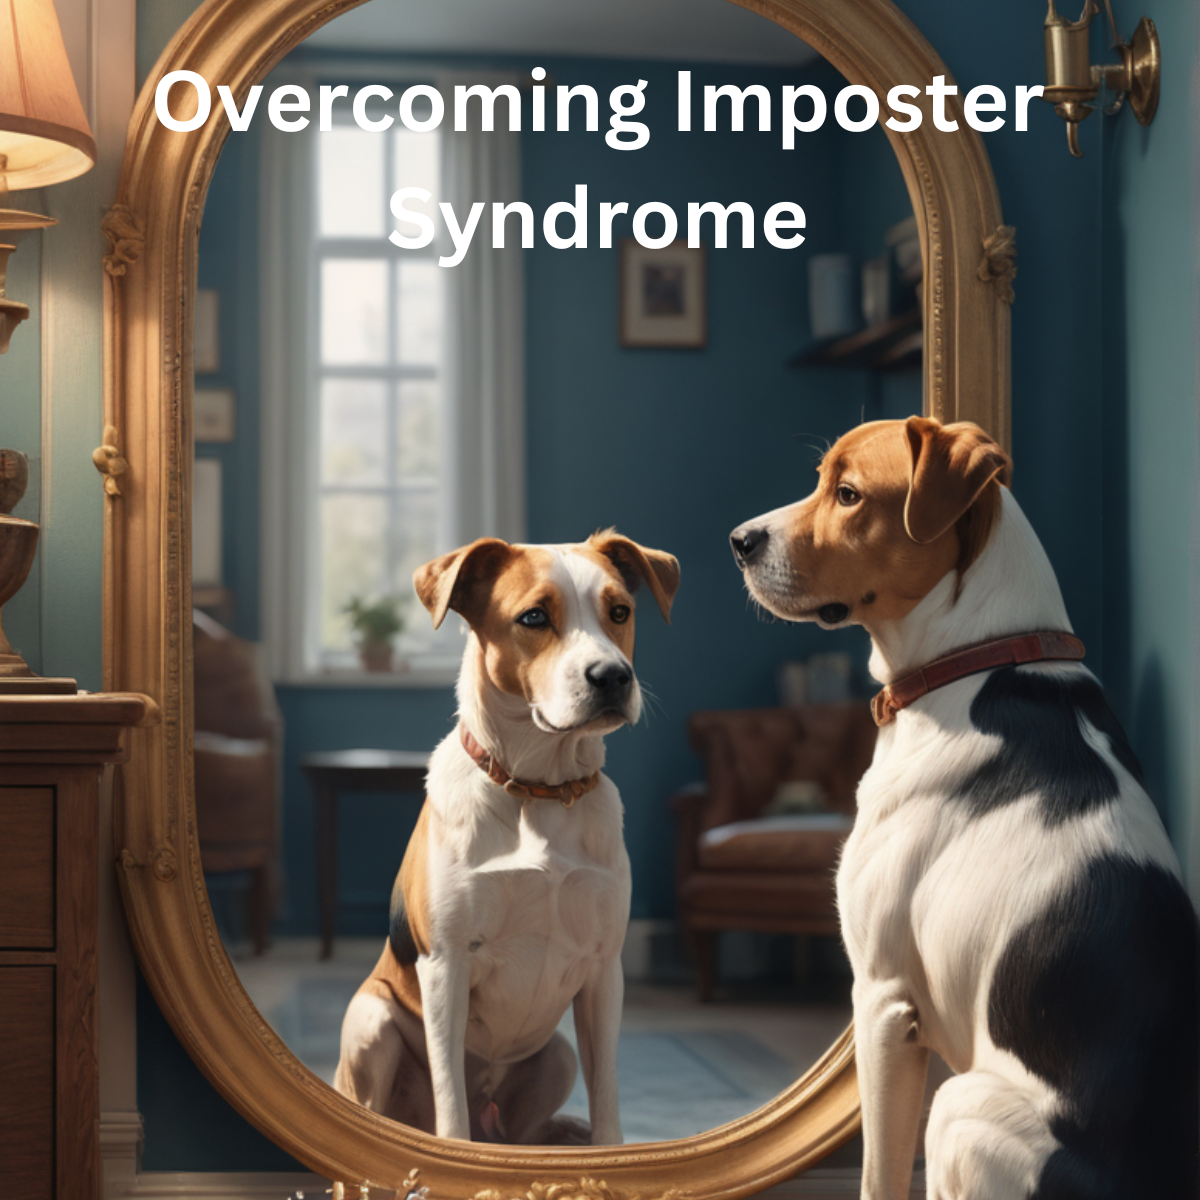 Overcoming Imposter Syndrome during job search